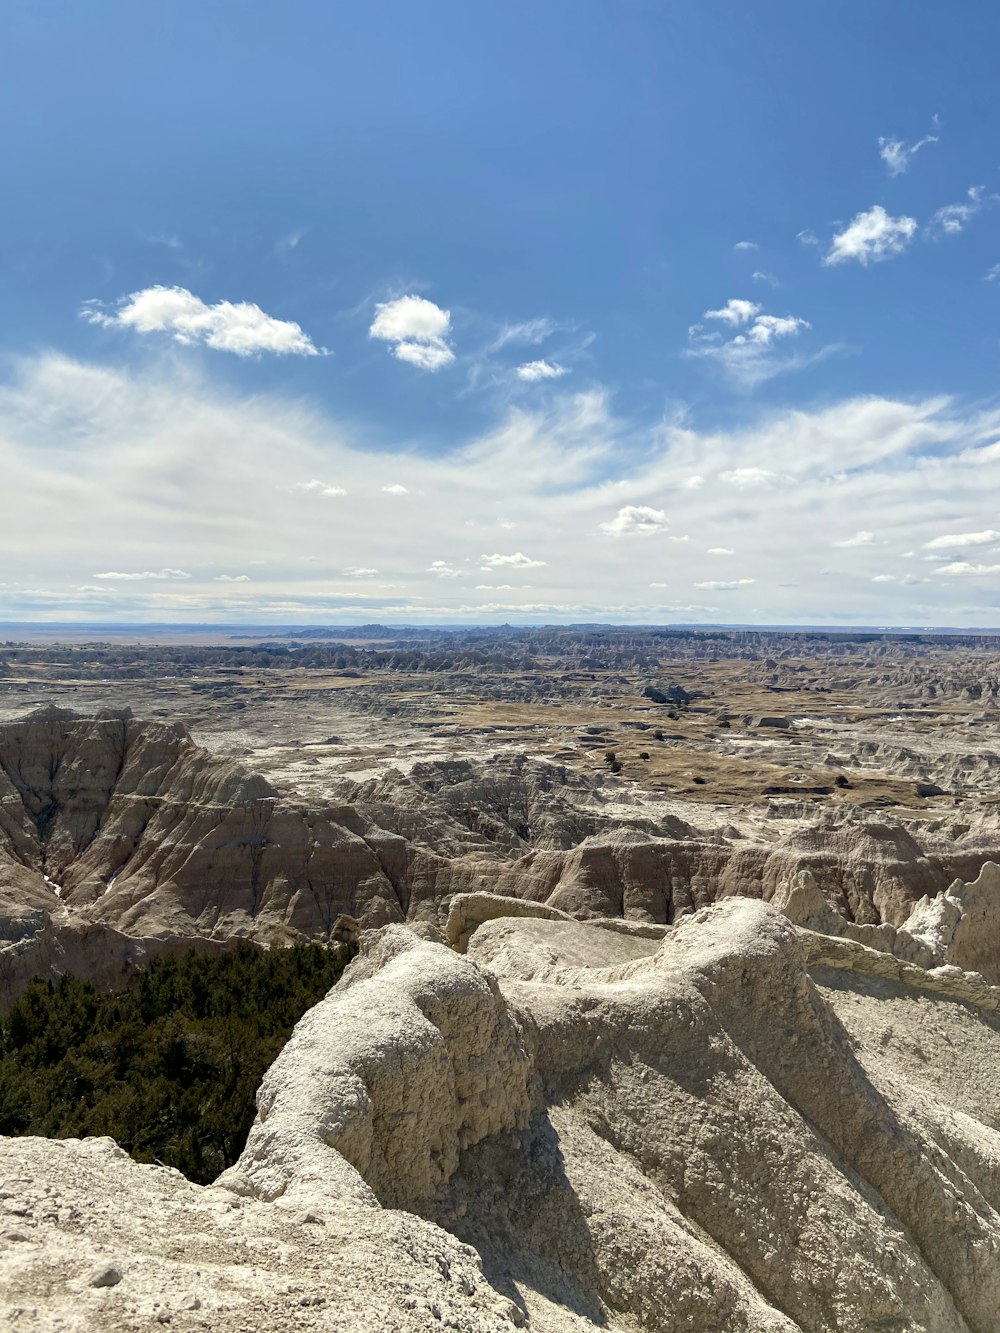 a view of the badlands from a high point of view